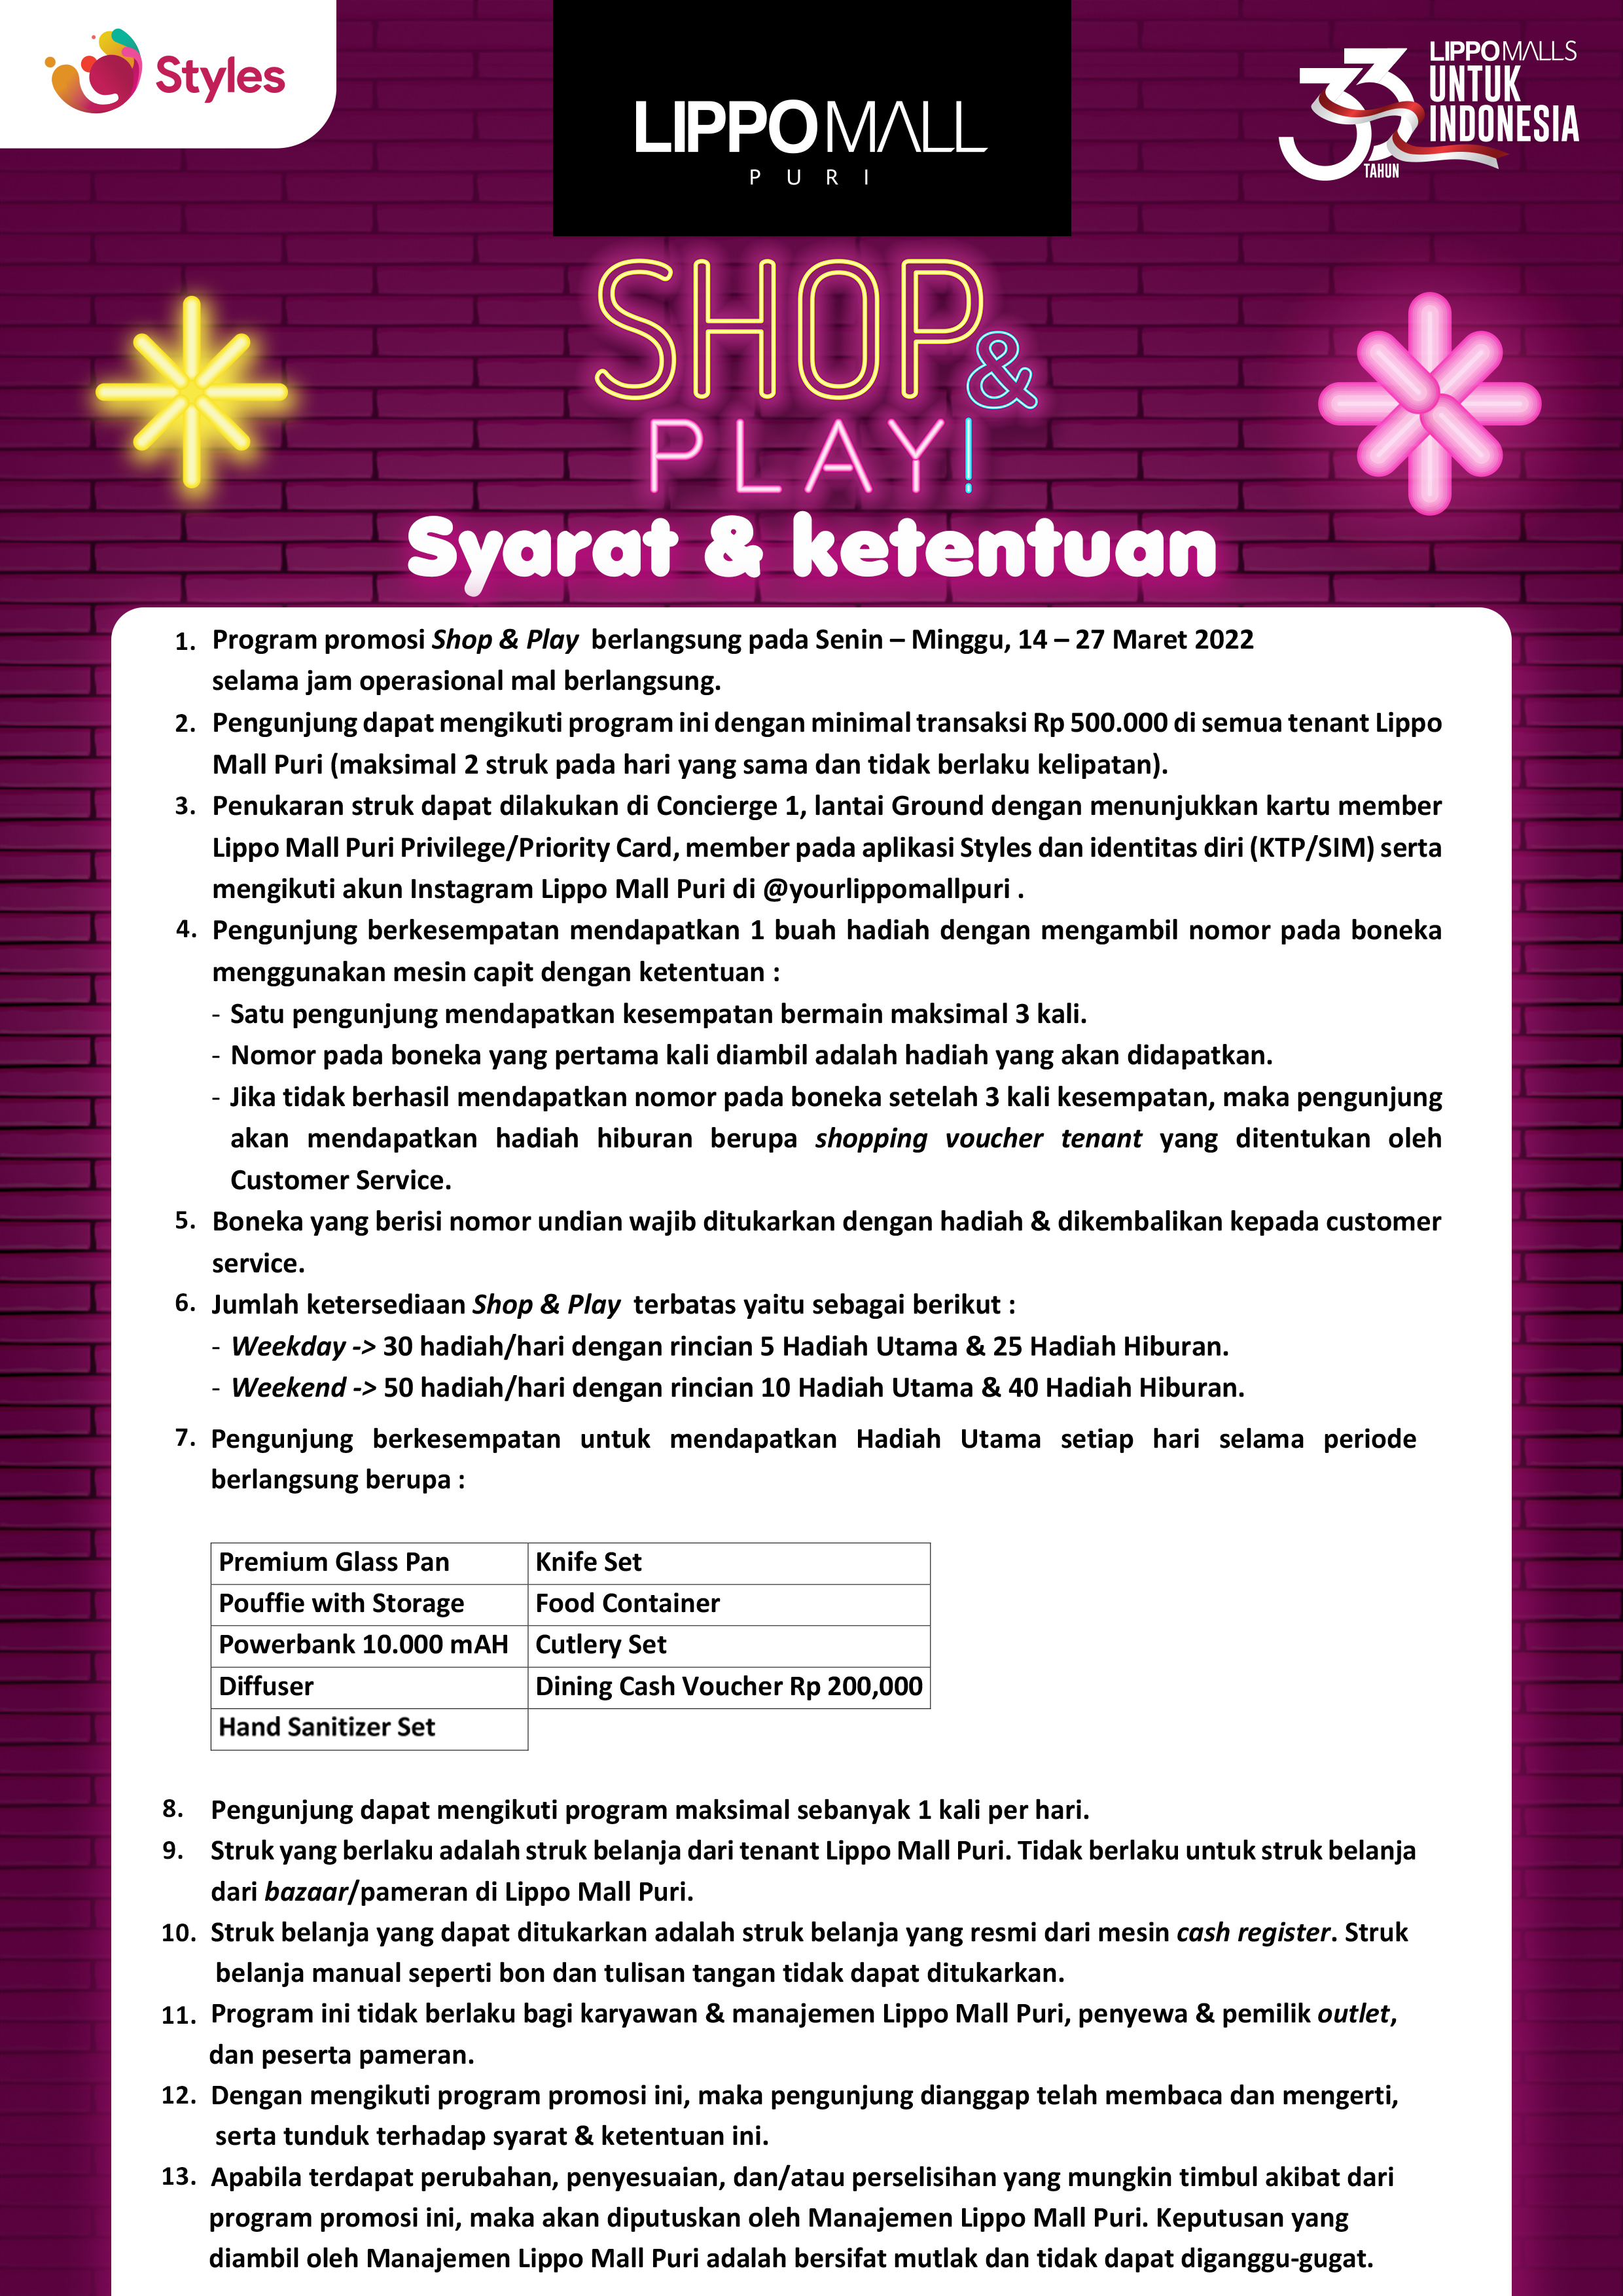 Shop & Play Terms & Conditions in lippo mall puri st. moritz